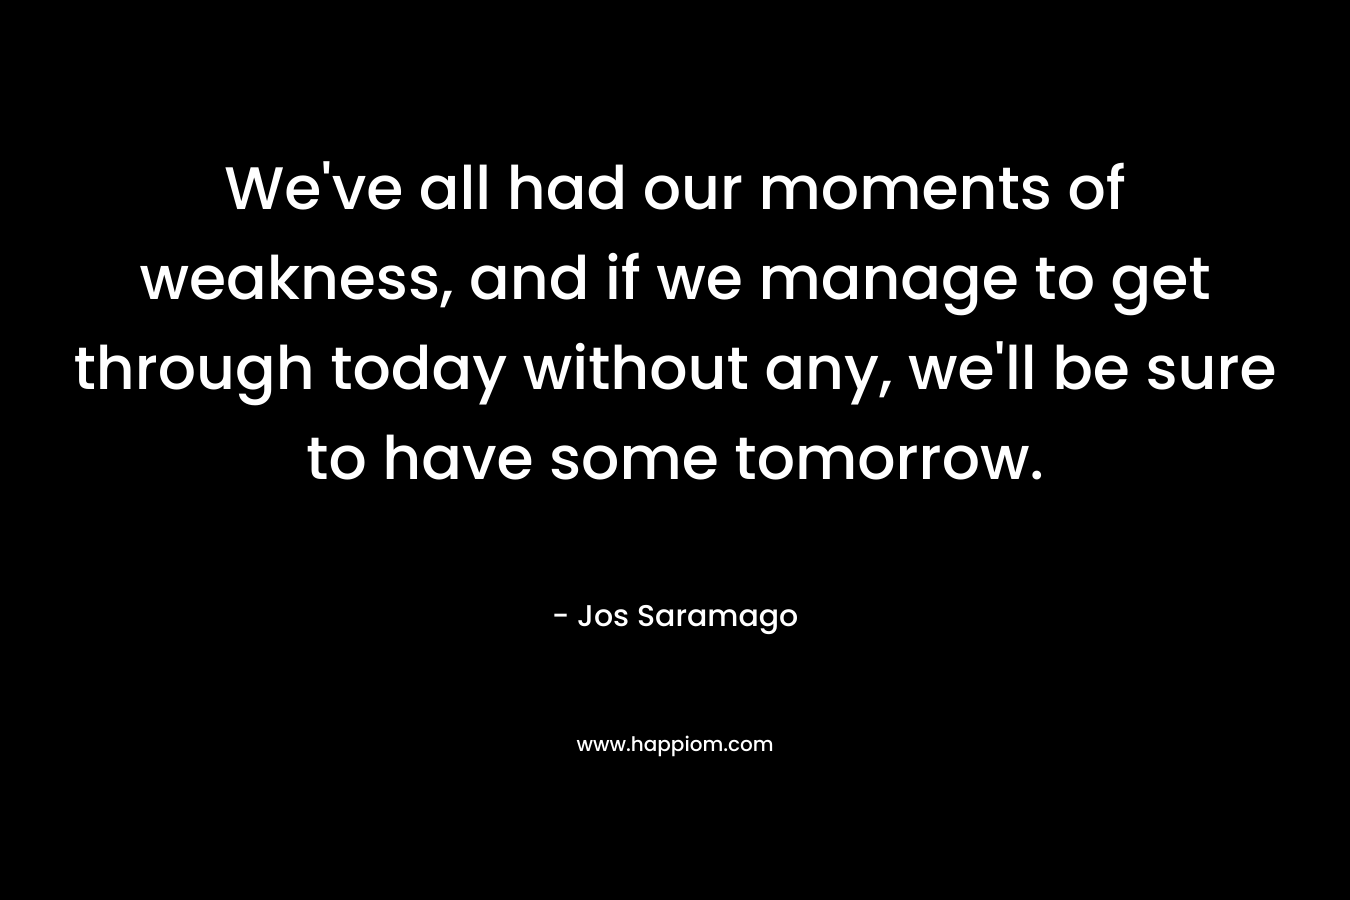 We've all had our moments of weakness, and if we manage to get through today without any, we'll be sure to have some tomorrow.